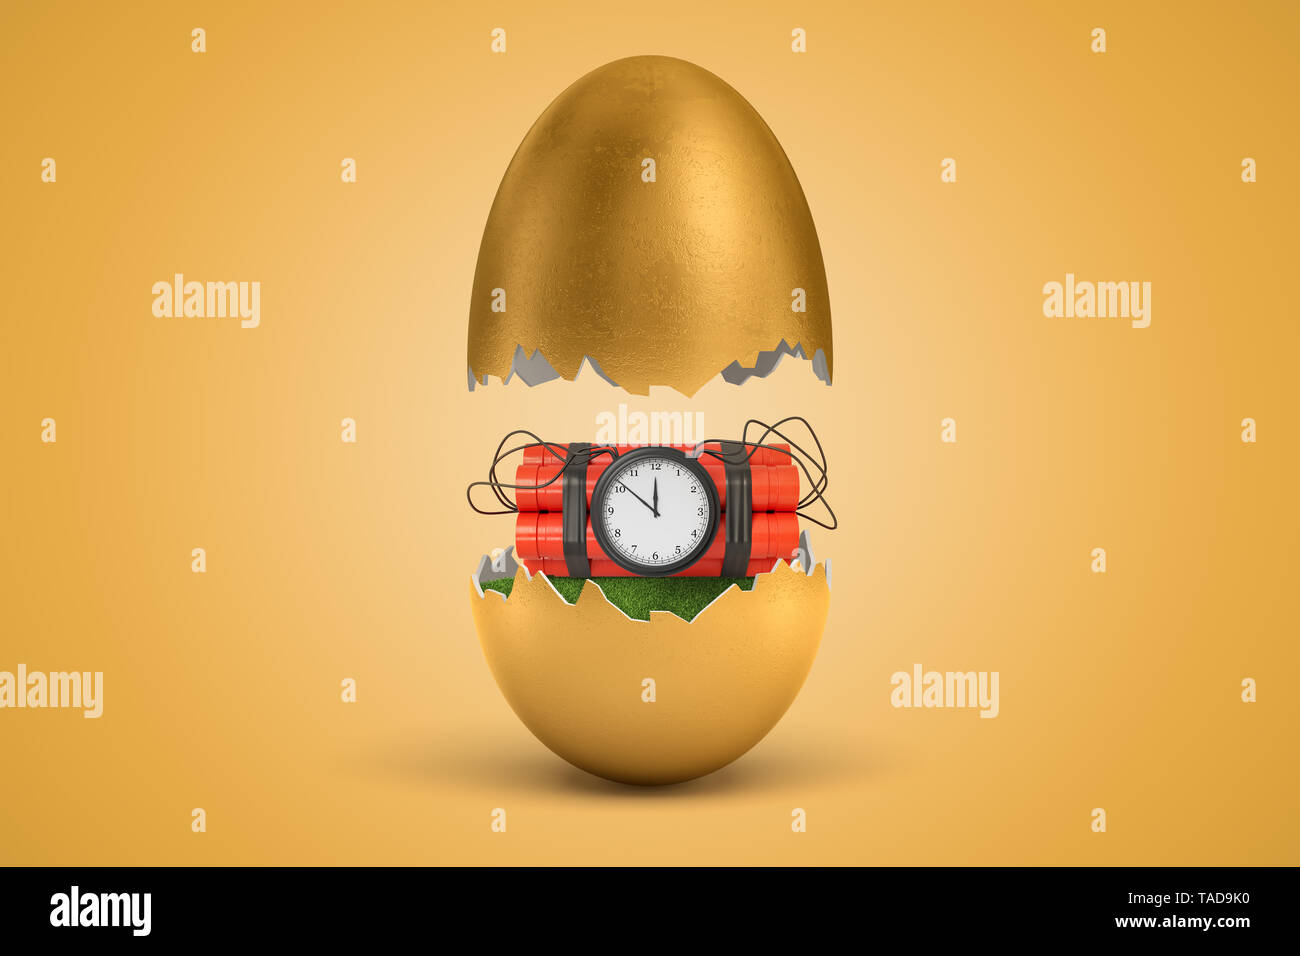 3d rendering of gold egg cracked in two, upper half levitating in air, red dynamite bundle with time bomb on green grass inside lower half. Stock Photo